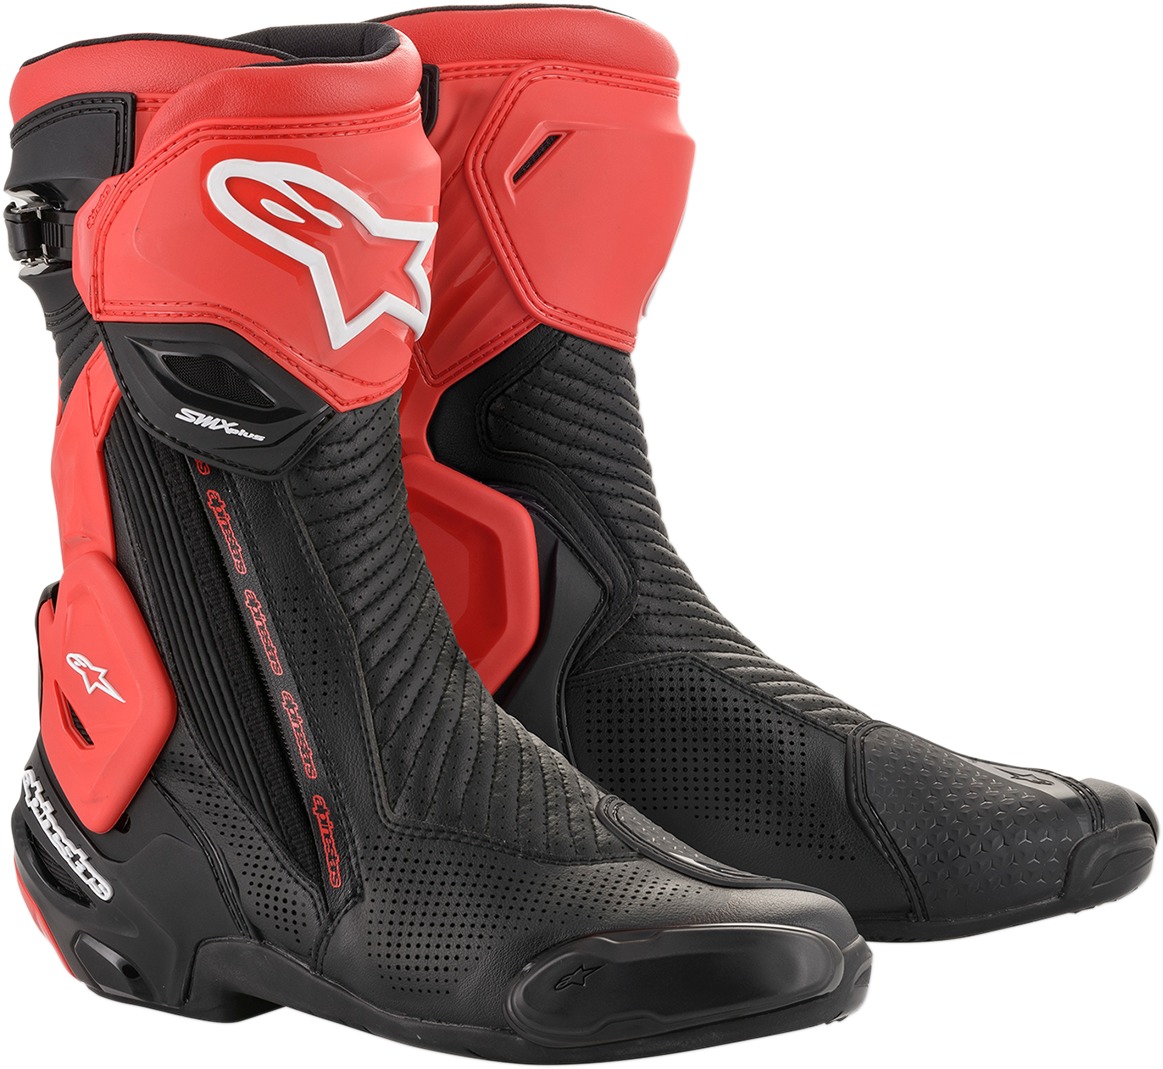 SMX Plus Street Riding Boots Black/Red US 11.5 - Click Image to Close